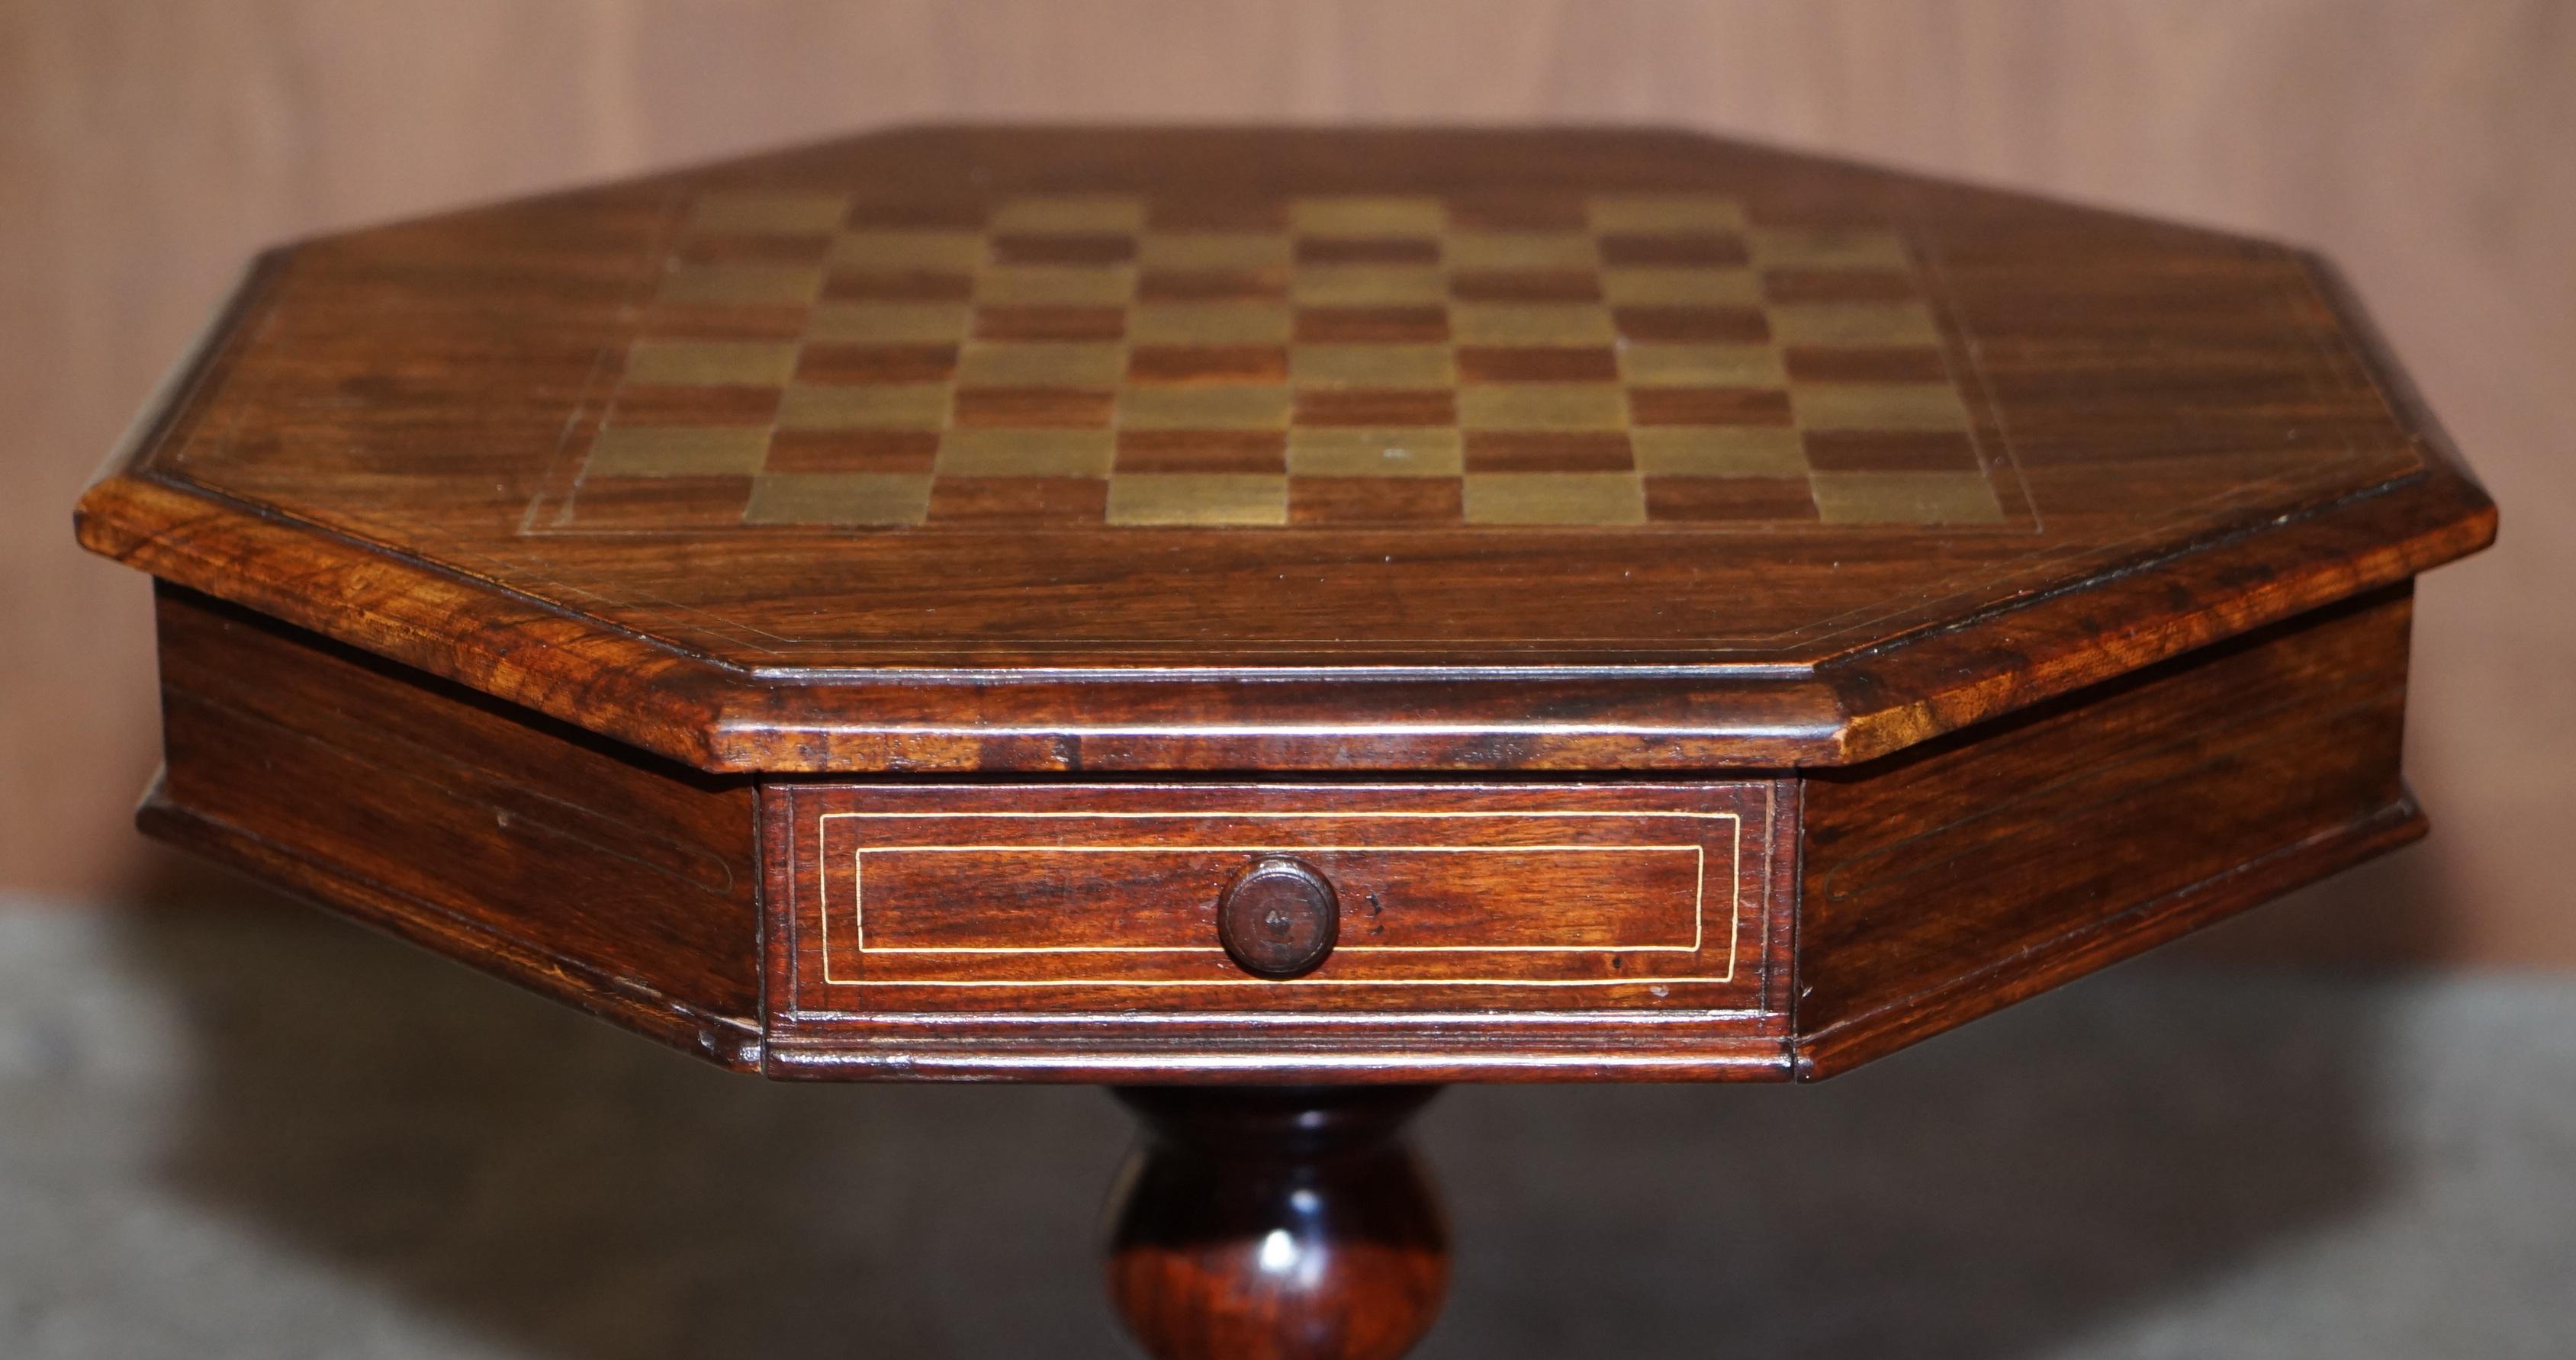 Hand-Crafted Antique Victorain Hardwood Brass Inlaid Chess Games Table with Staunton Pieces